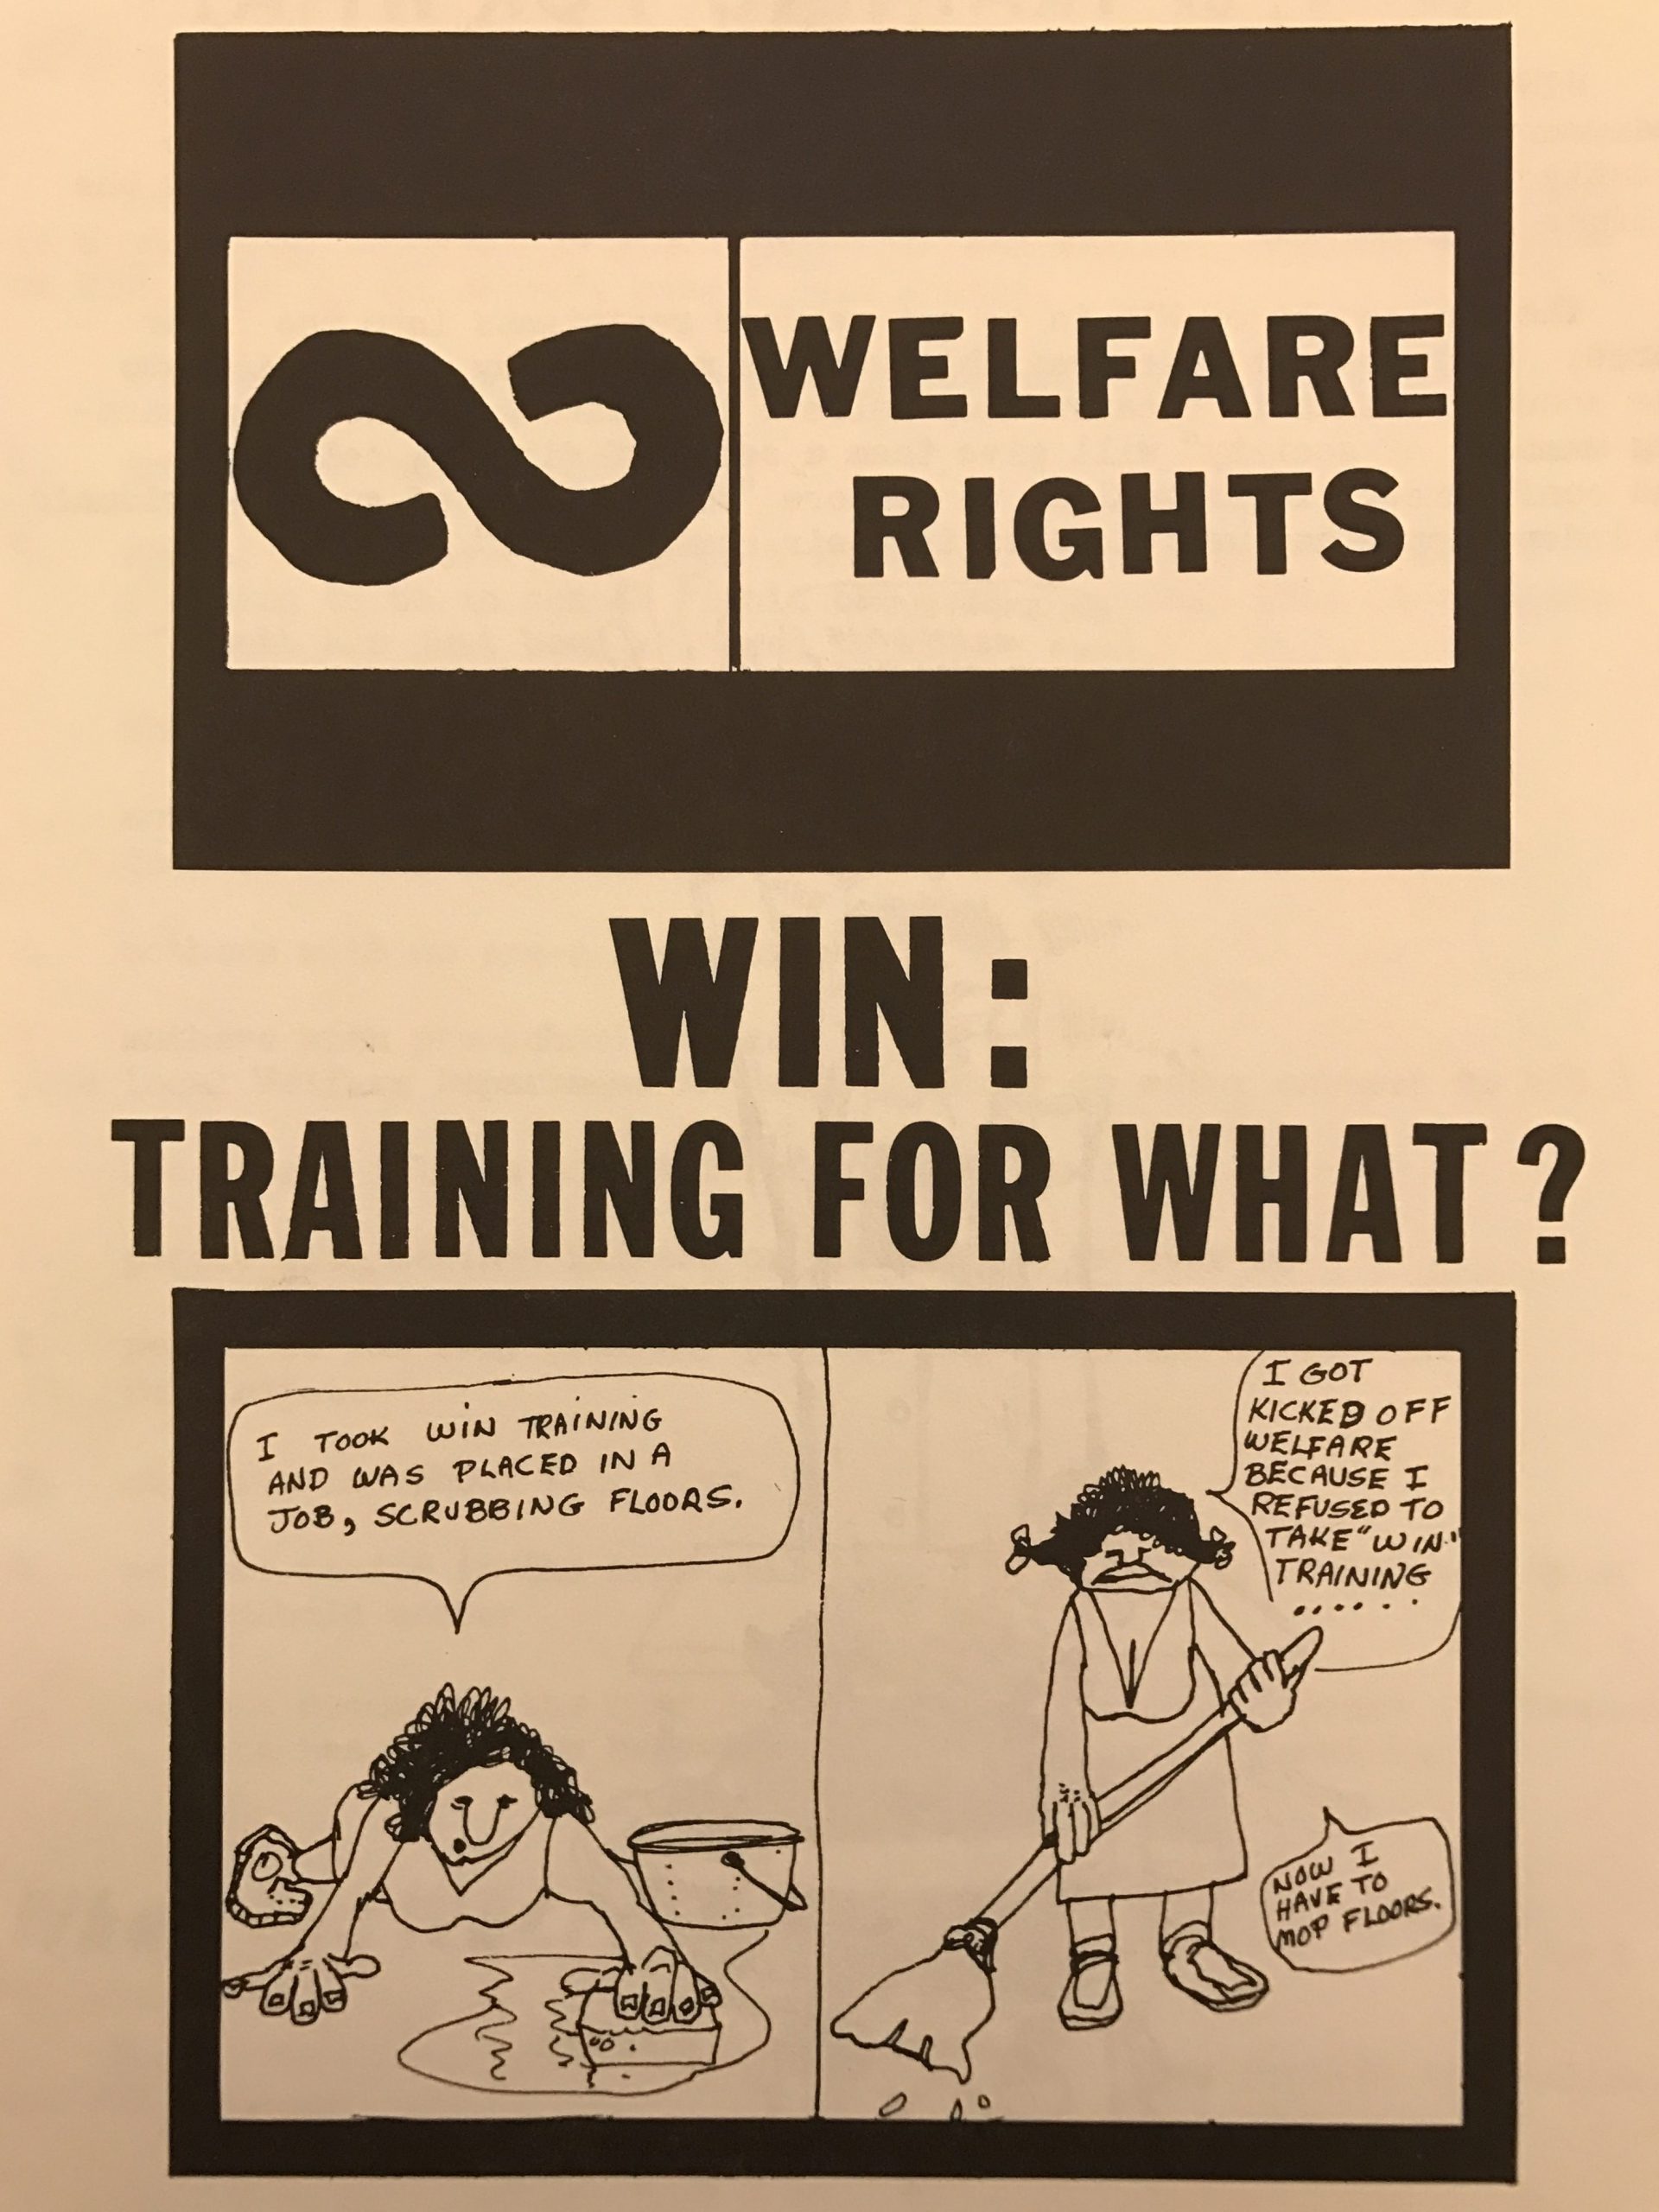 Pamphlet Produced by the Greater Cleveland Welfare Rights Organization